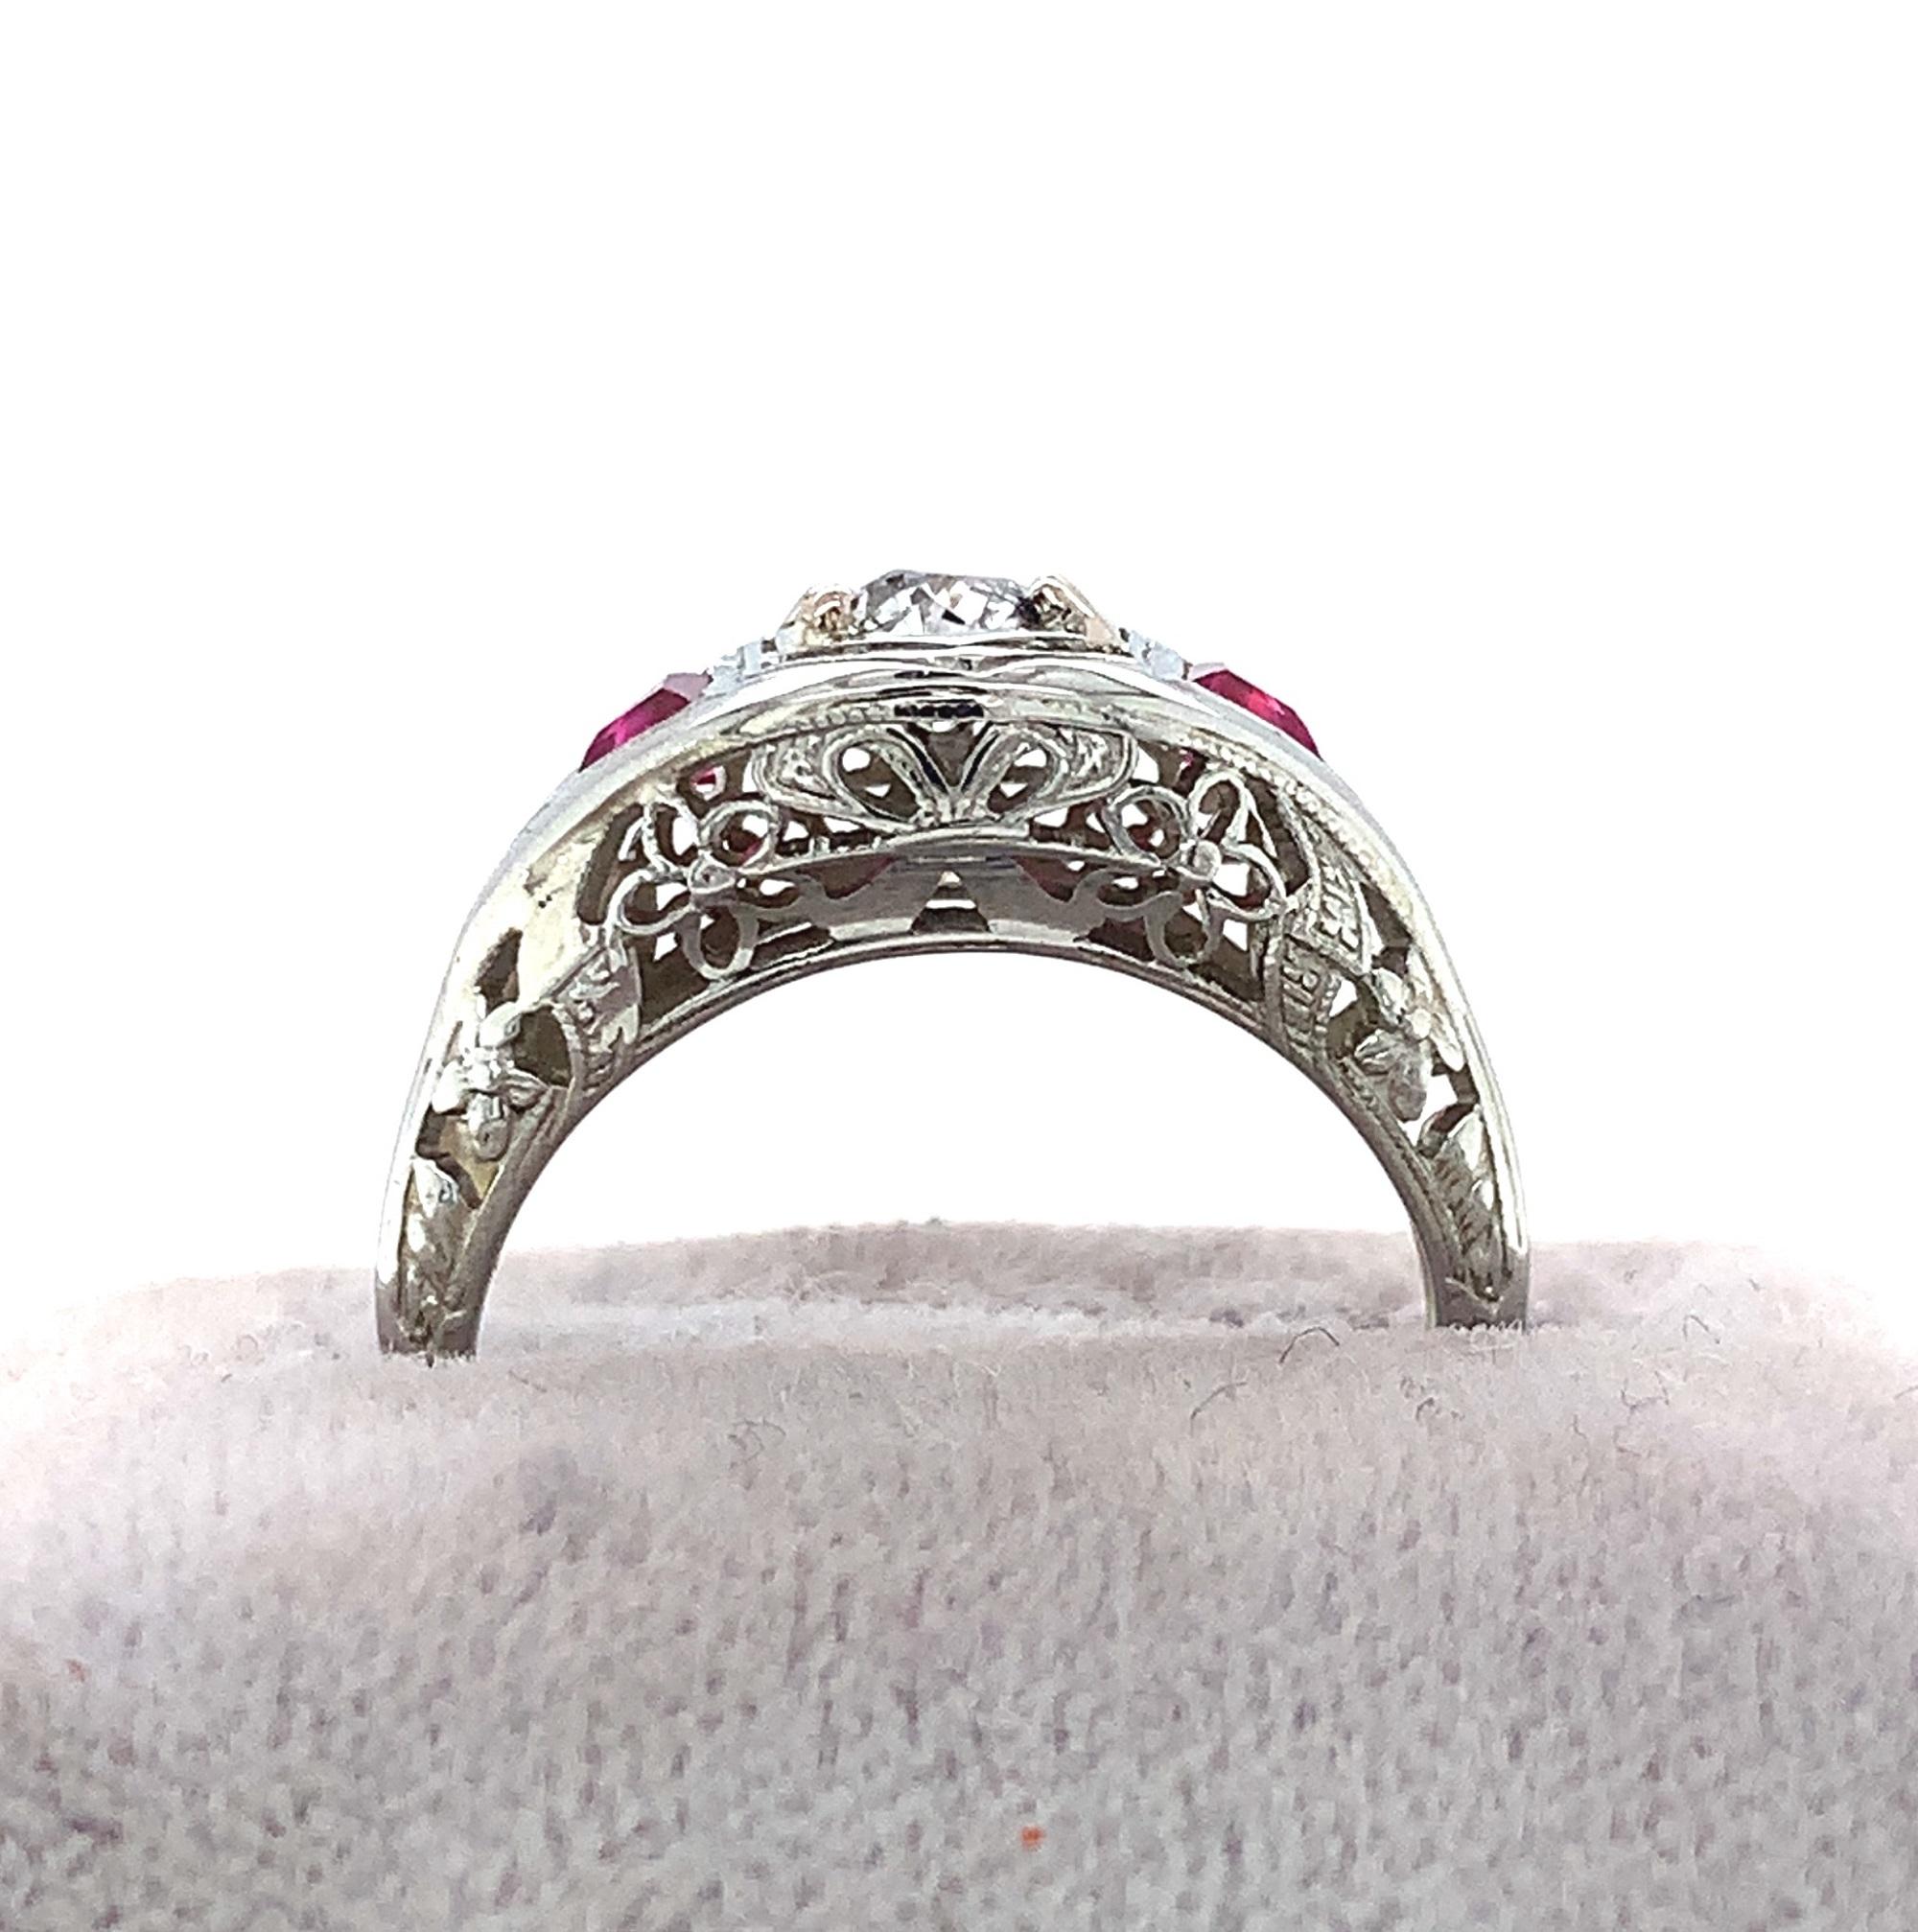 18K white gold filigree Art Deco diamond ring. The European cut diamond weighs .30cts and is accented by a pair of specialty triangle cut red synthetic rubies. The diamond measures about 4.25mm with H-I clarity and SI1 clarity. There are 4 new